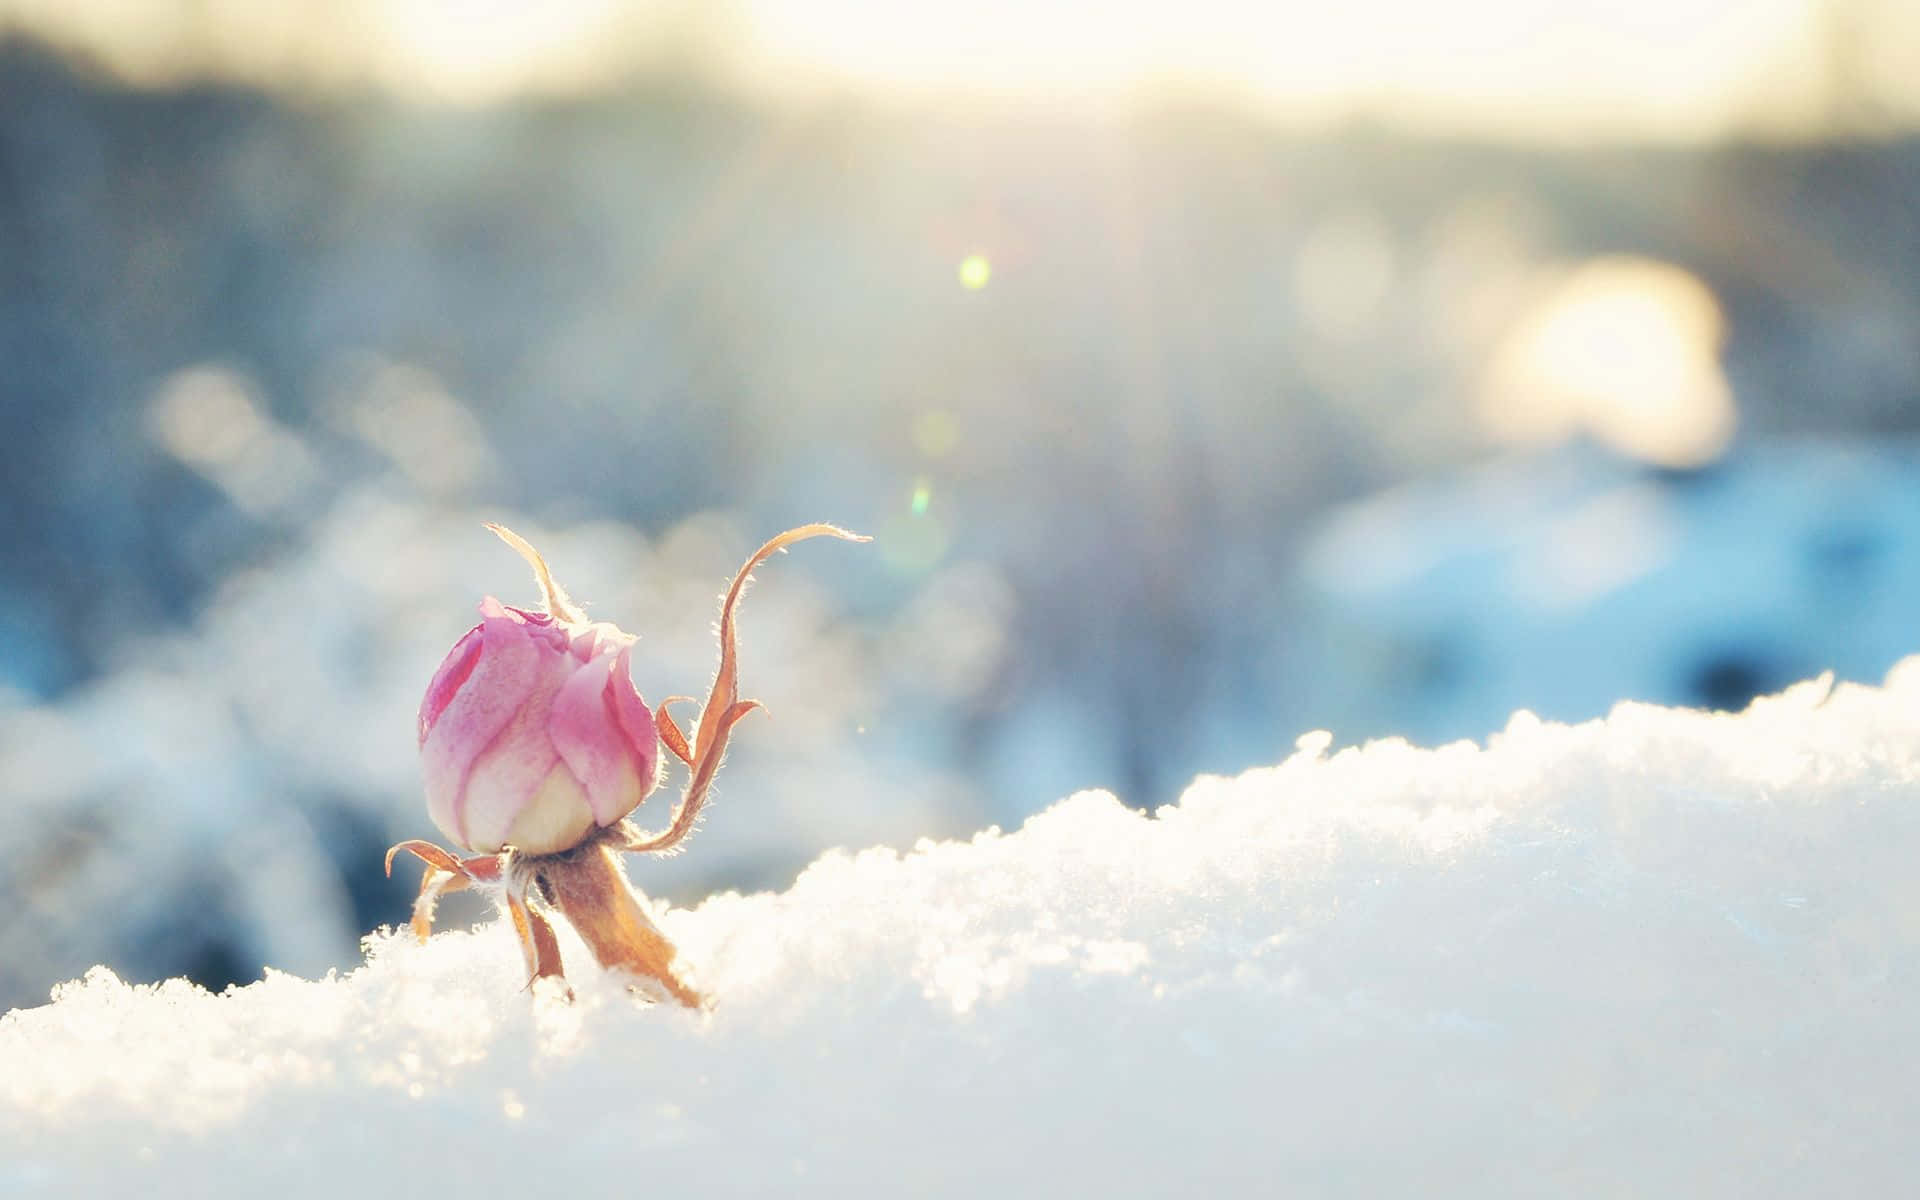 Winter Flower Pictures  Download Free Images on Unsplash